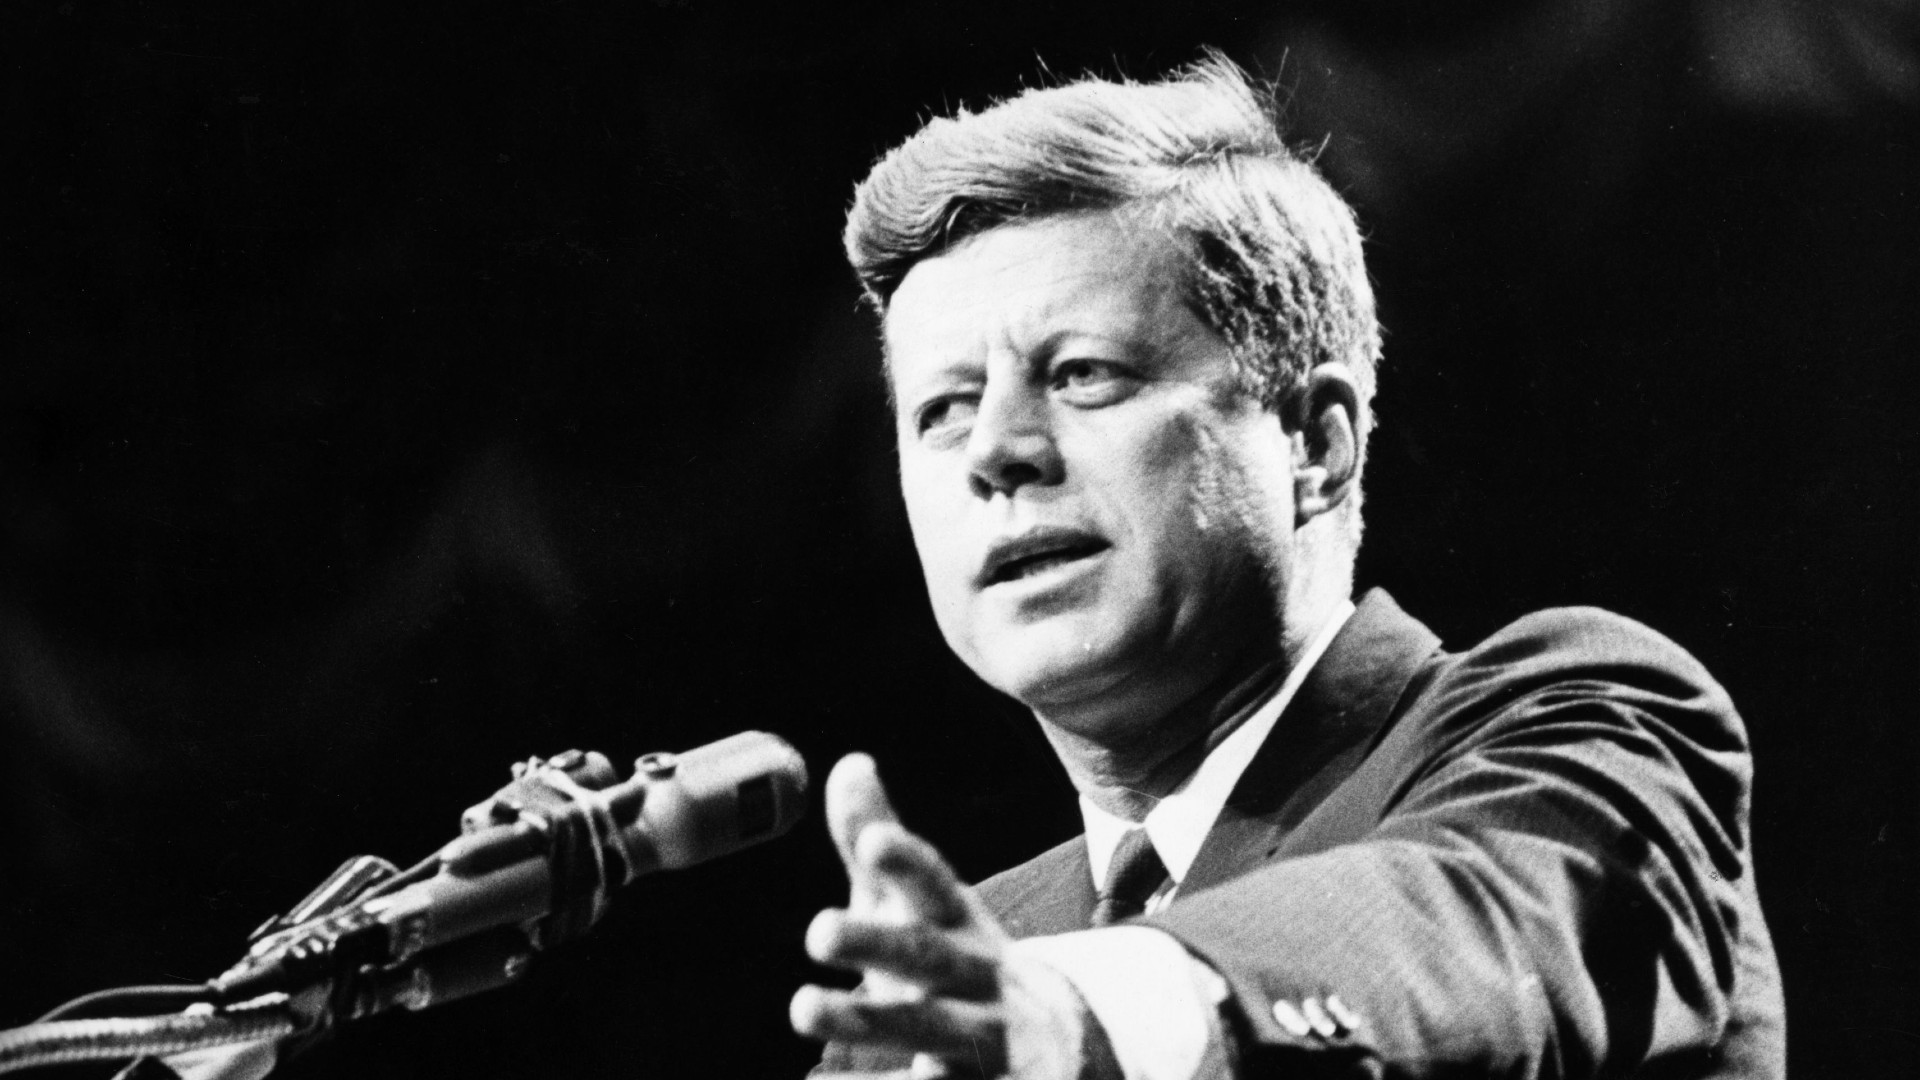 President John F Kennedy, the 35th President of the United states